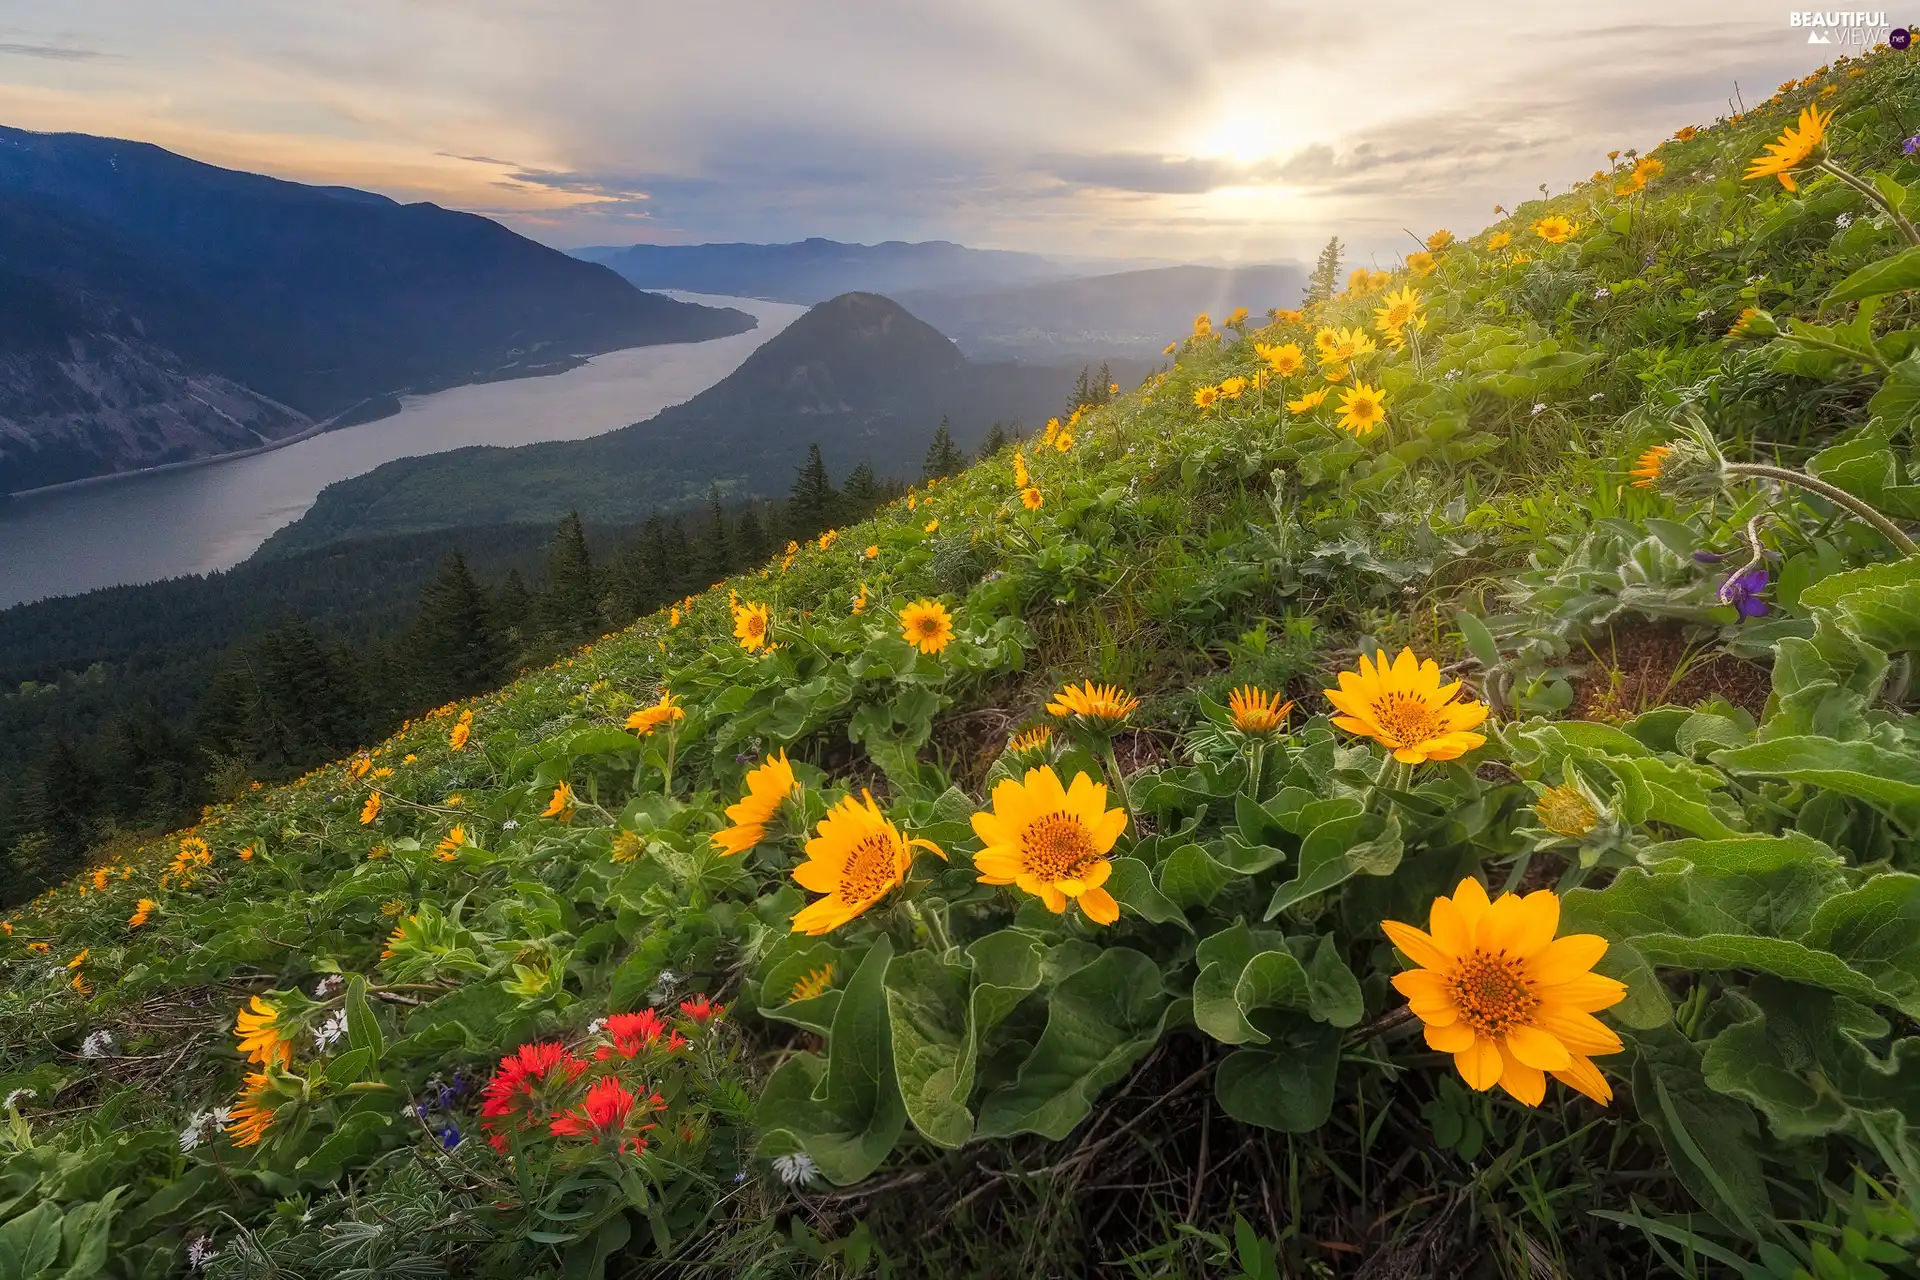 Washington State, The United States, Columbia River Gorge Nature Reserve, Cascade Mountains, Sunrise, Meadow, Hill-side, Balsamroots Flowers, Columbia River